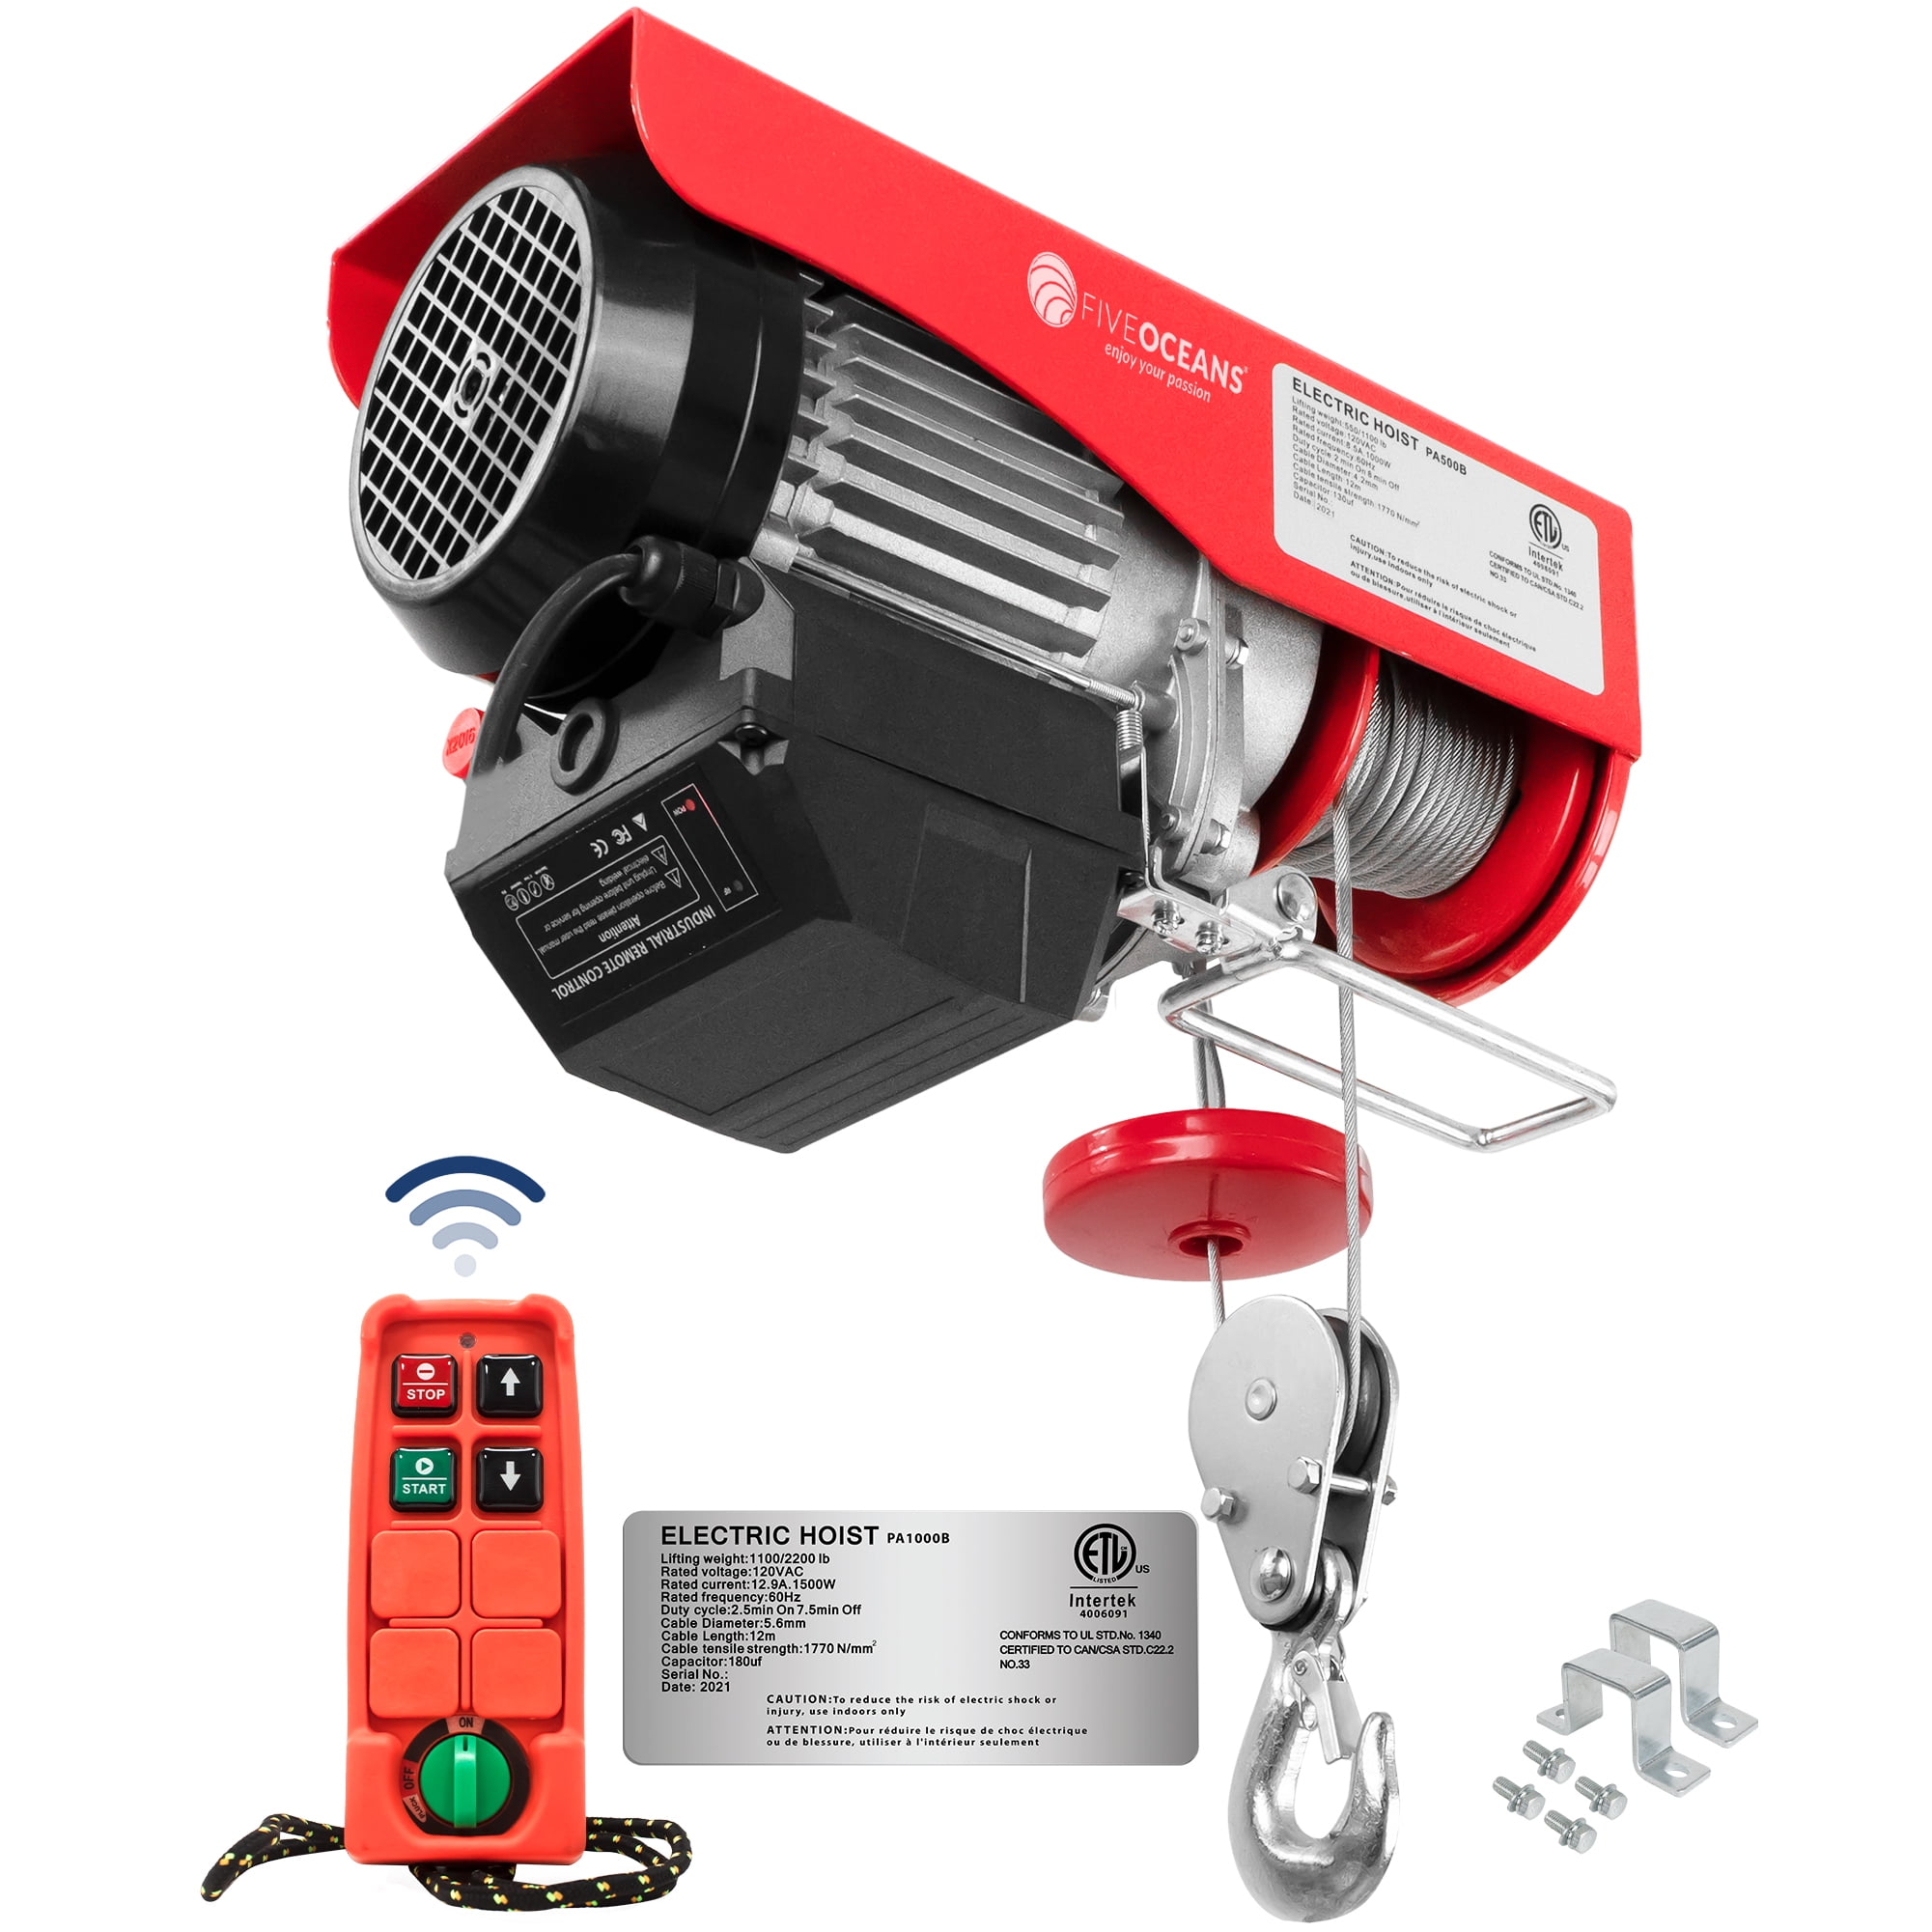 NEW 1300 LB ELECTRIC HOIST & REMOTE UL LISTED WINCH 